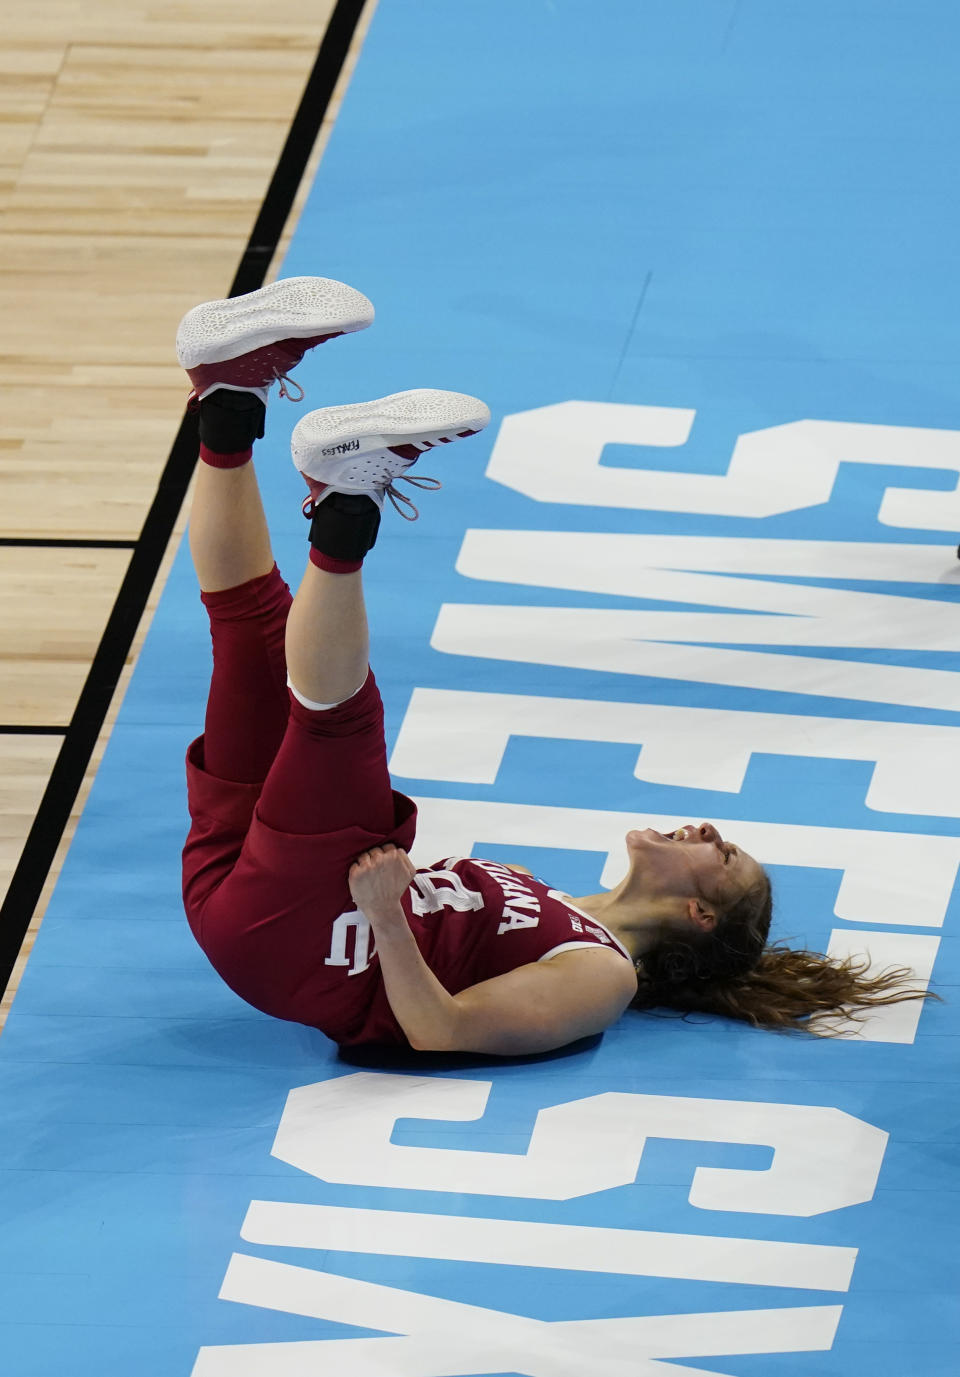 Indiana guard Ali Patberg (14) celebrates a play against North Carolina State during the second half of a college basketball game in the Sweet Sixteen round of the women's NCAA tournament at the Alamodome in San Antonio, Saturday, March 27, 2021. (AP Photo/Eric Gay)